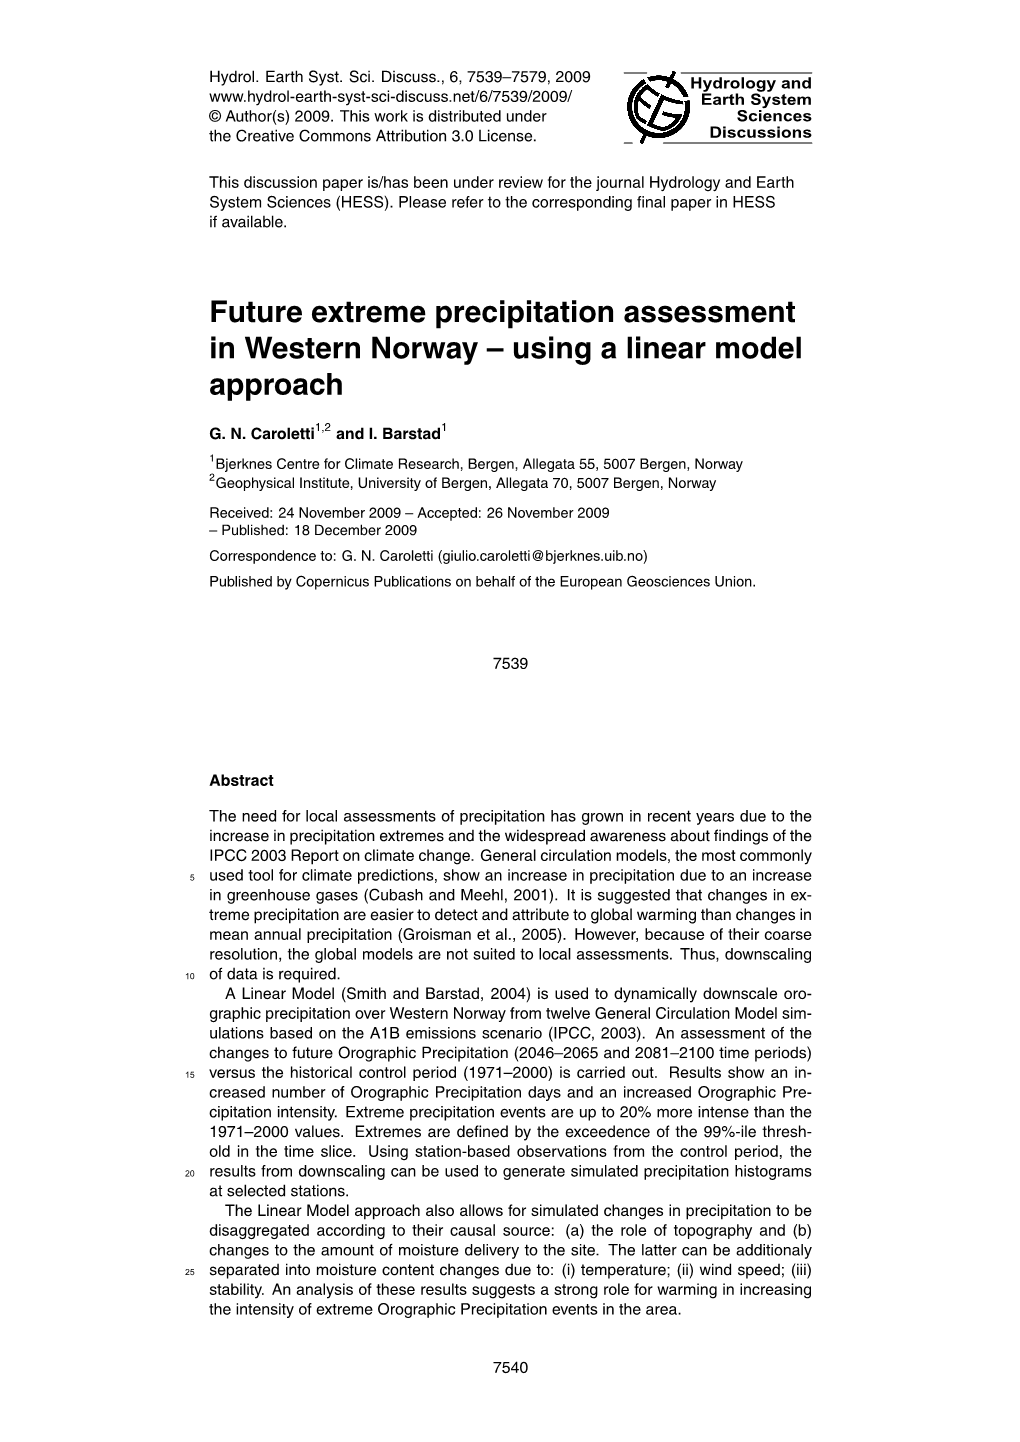 Future Extreme Precipitation Assessment in Western Norway – Using a Linear Model Approach